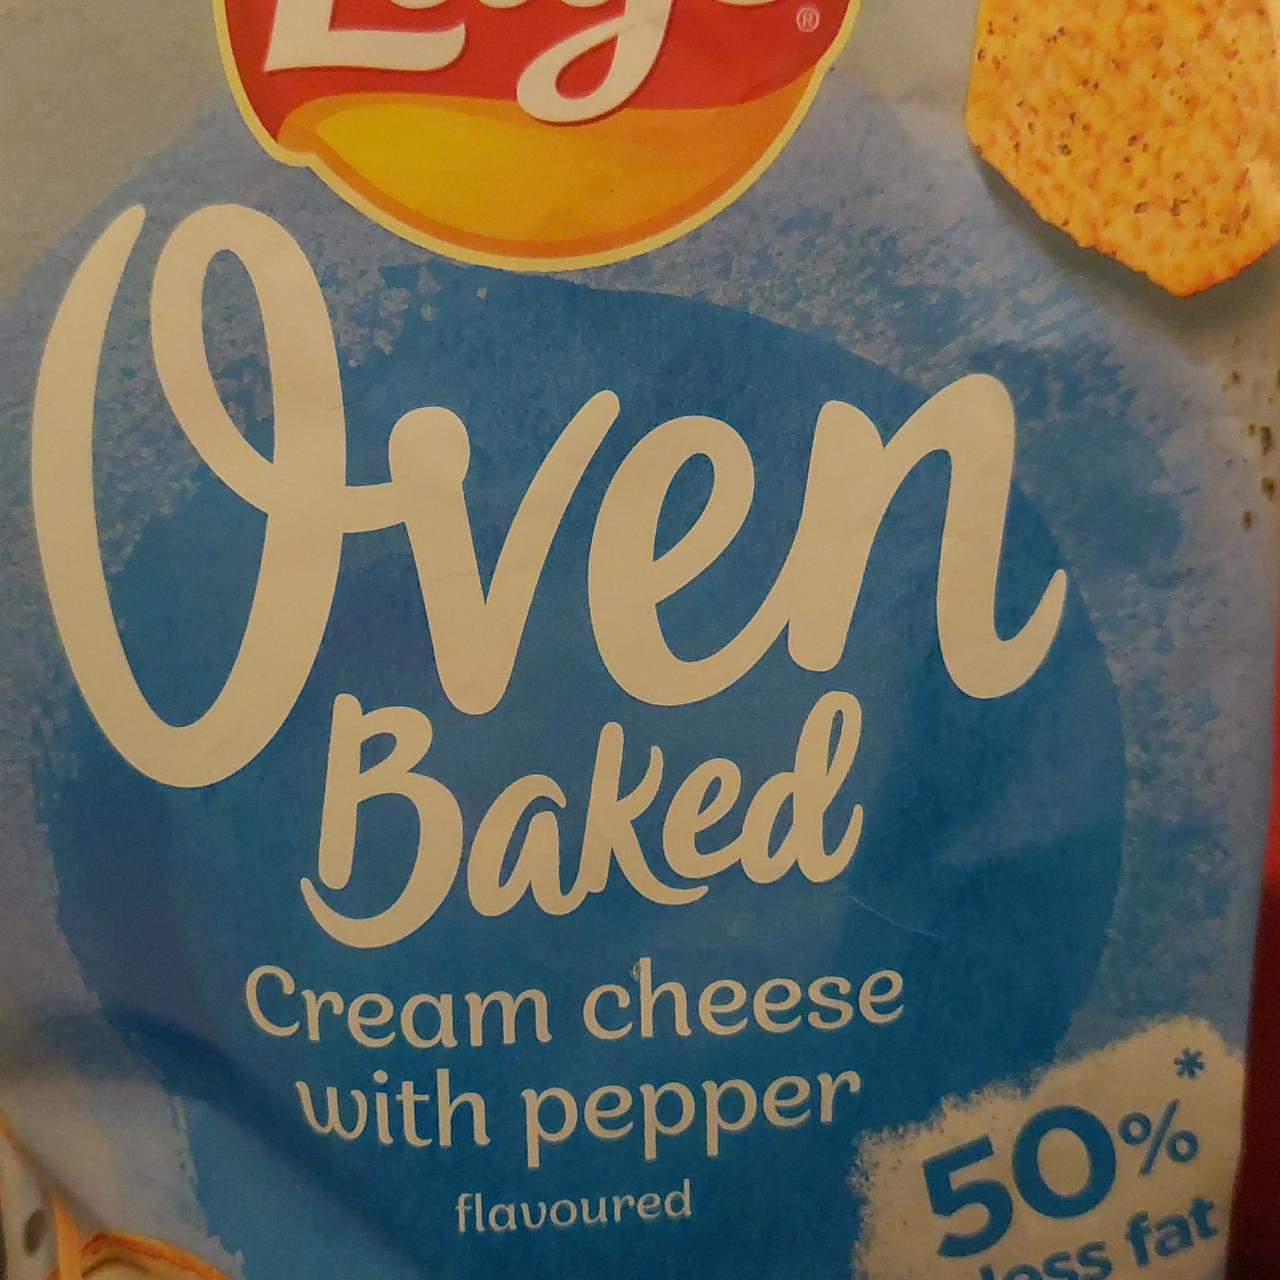 Zdjęcia - lays oven baked cream cheese with pepper